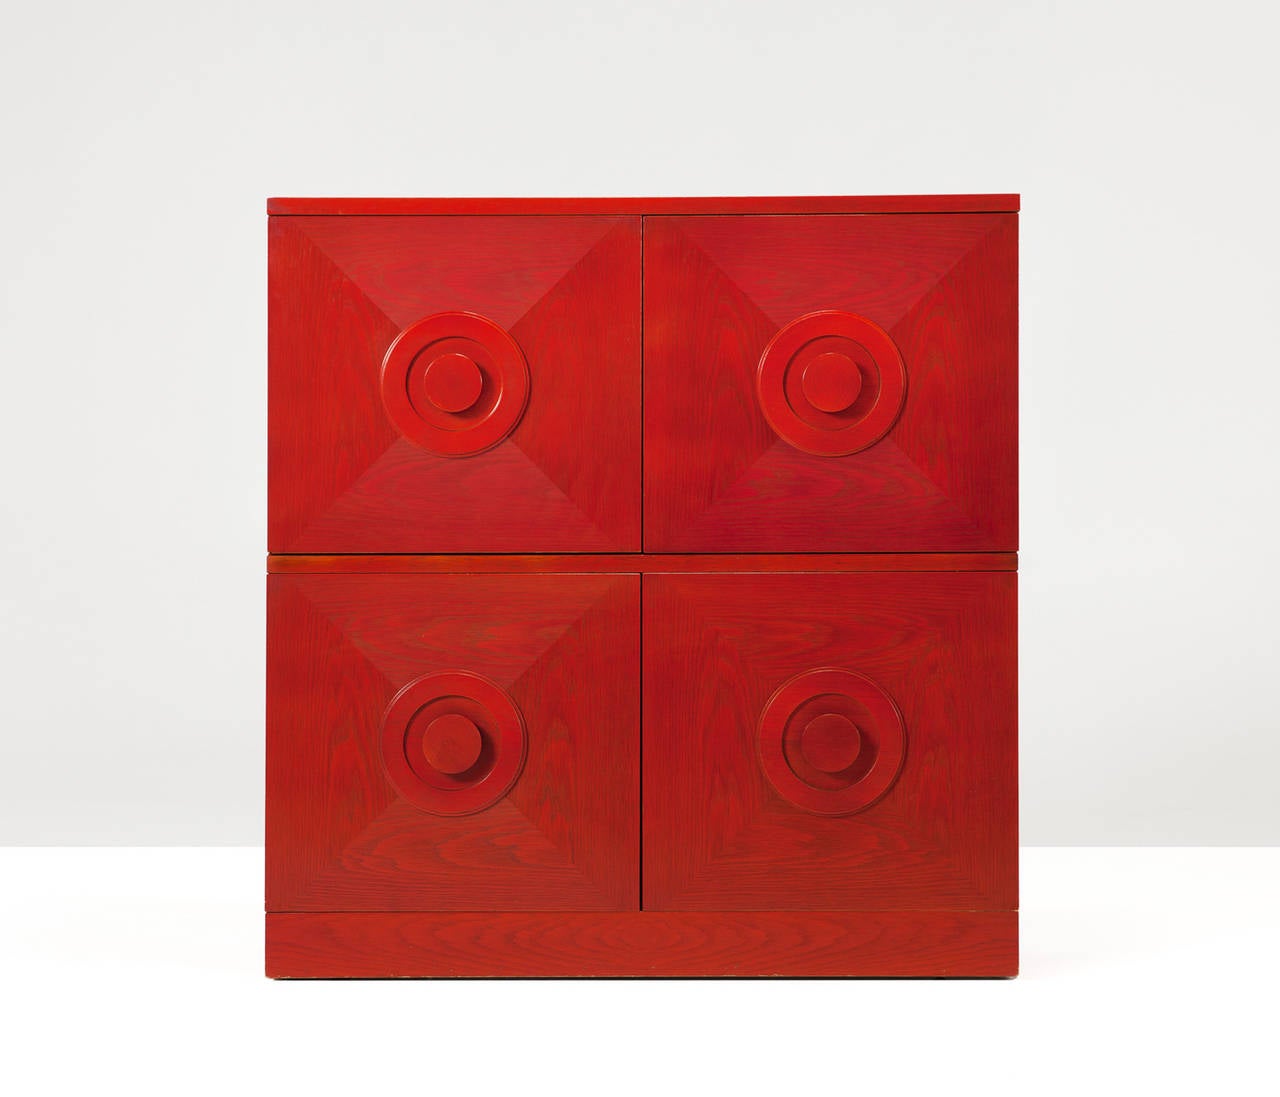 Sideboard, in oak, Belgium 1970s. 
 
Very unusual red stained oak chest/high credenza. The red stained surface has a very intense appearance and can color up any kind of interior, or nicely blend into a vivid existing interior. This Brutalist high